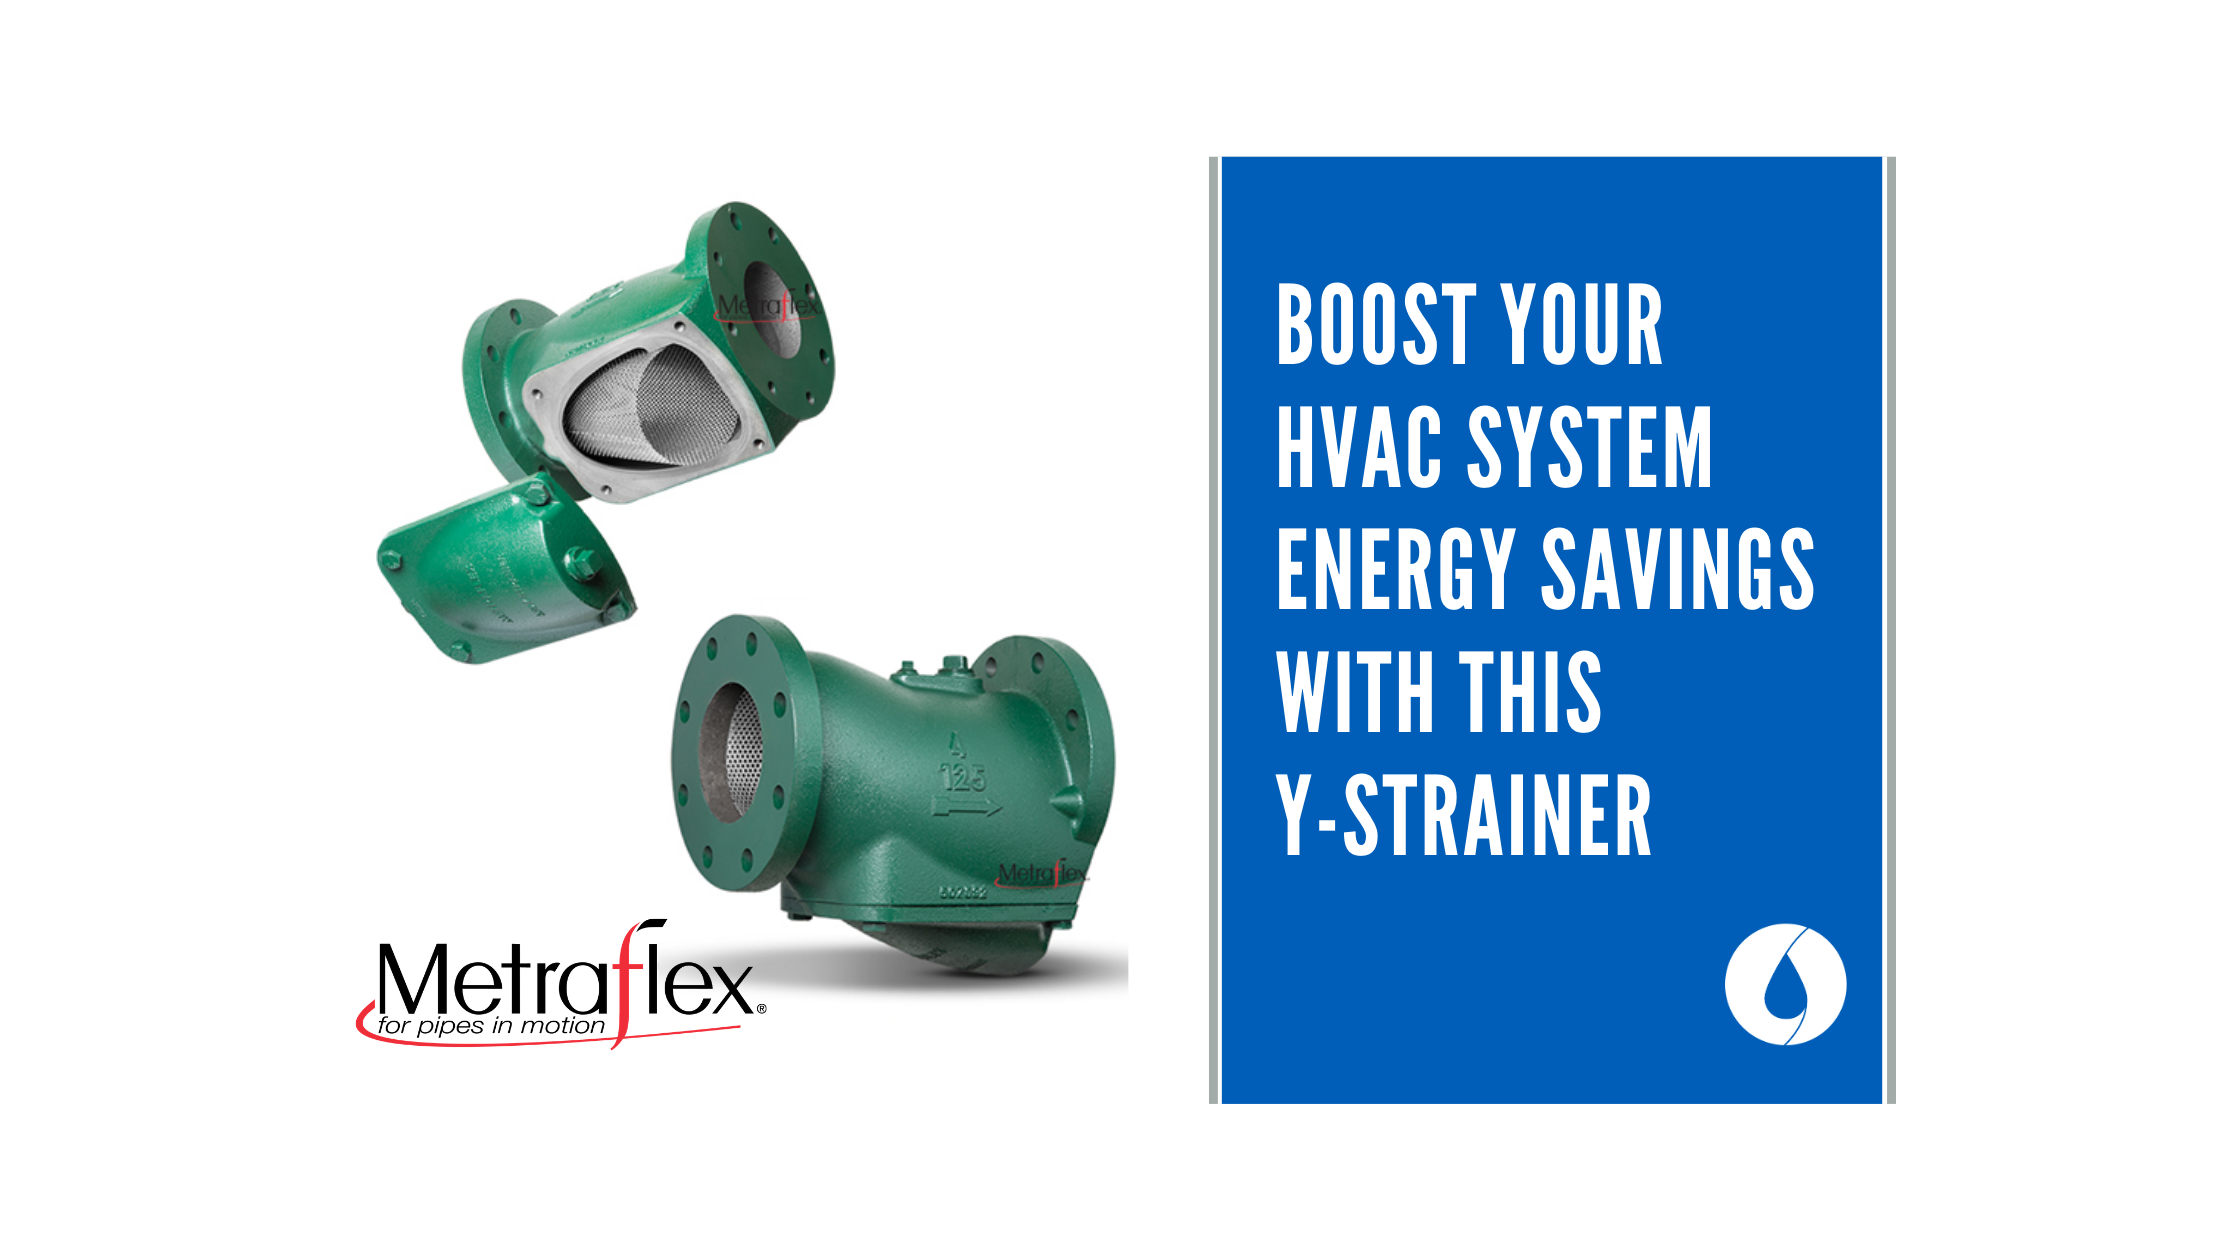 Boost Your HVAC System Energy Savings with this Y-Strainer